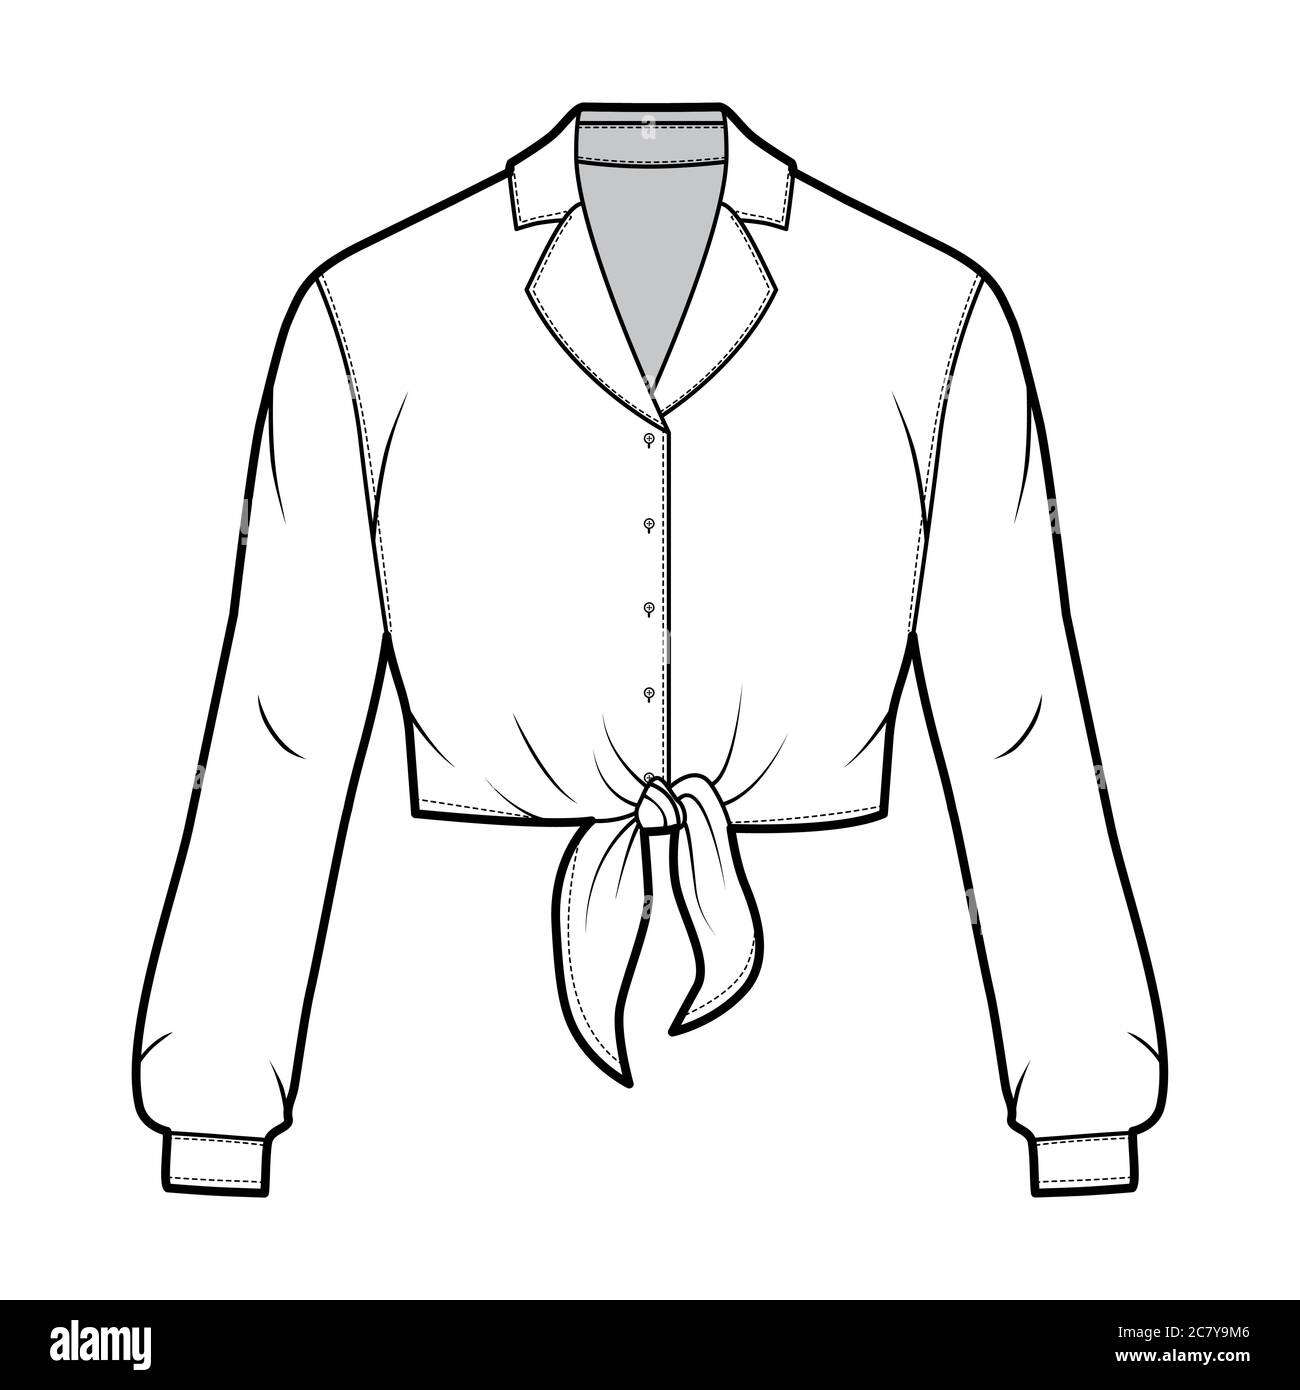 Cropped tie-front shirt technical fashion illustration with ...